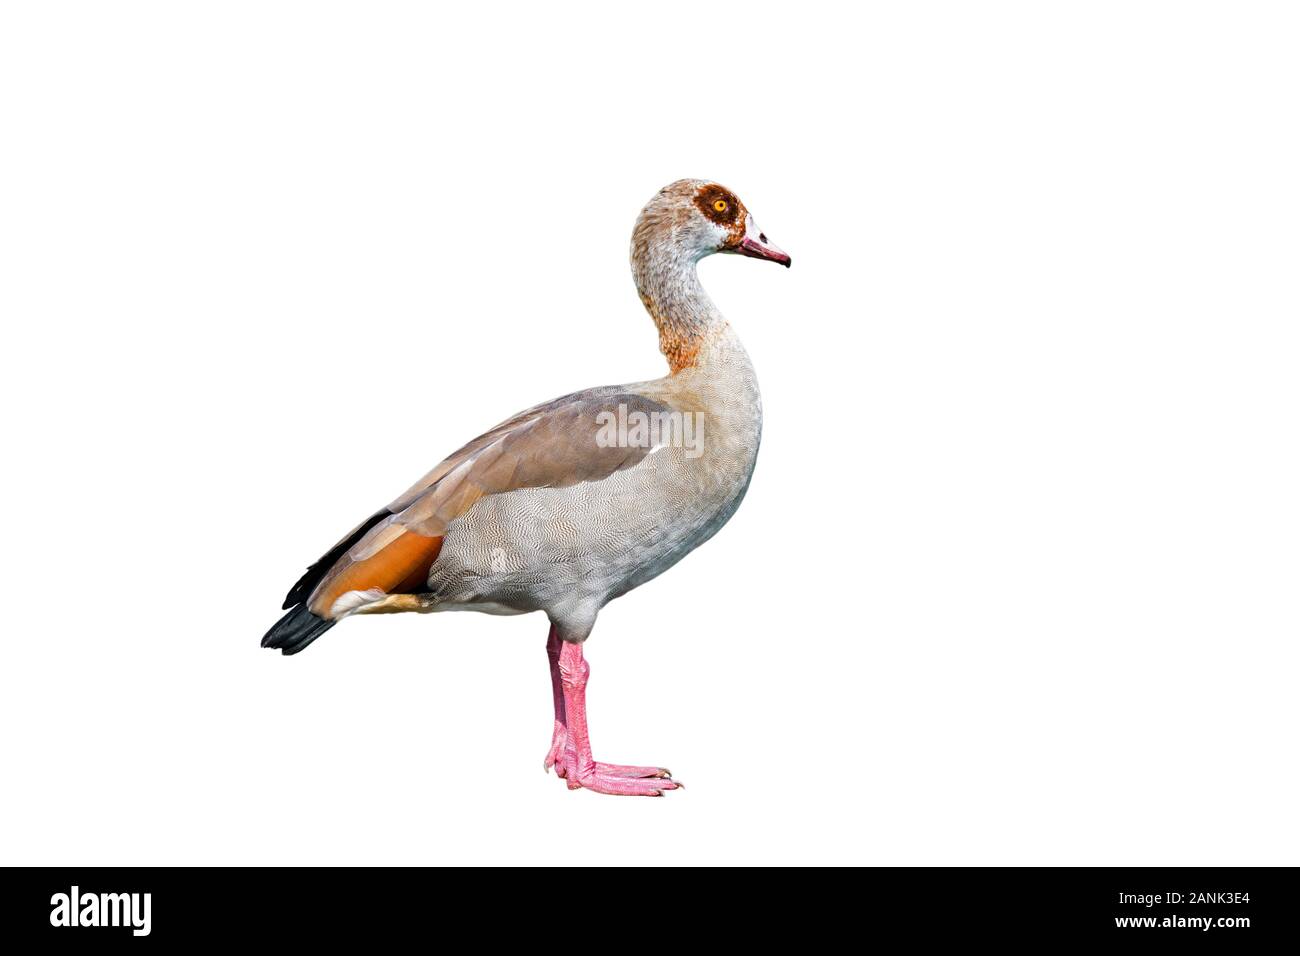 Egyptian goose (Alopochen aegyptiaca) native to Africa and the Nile Valley against white background Stock Photo